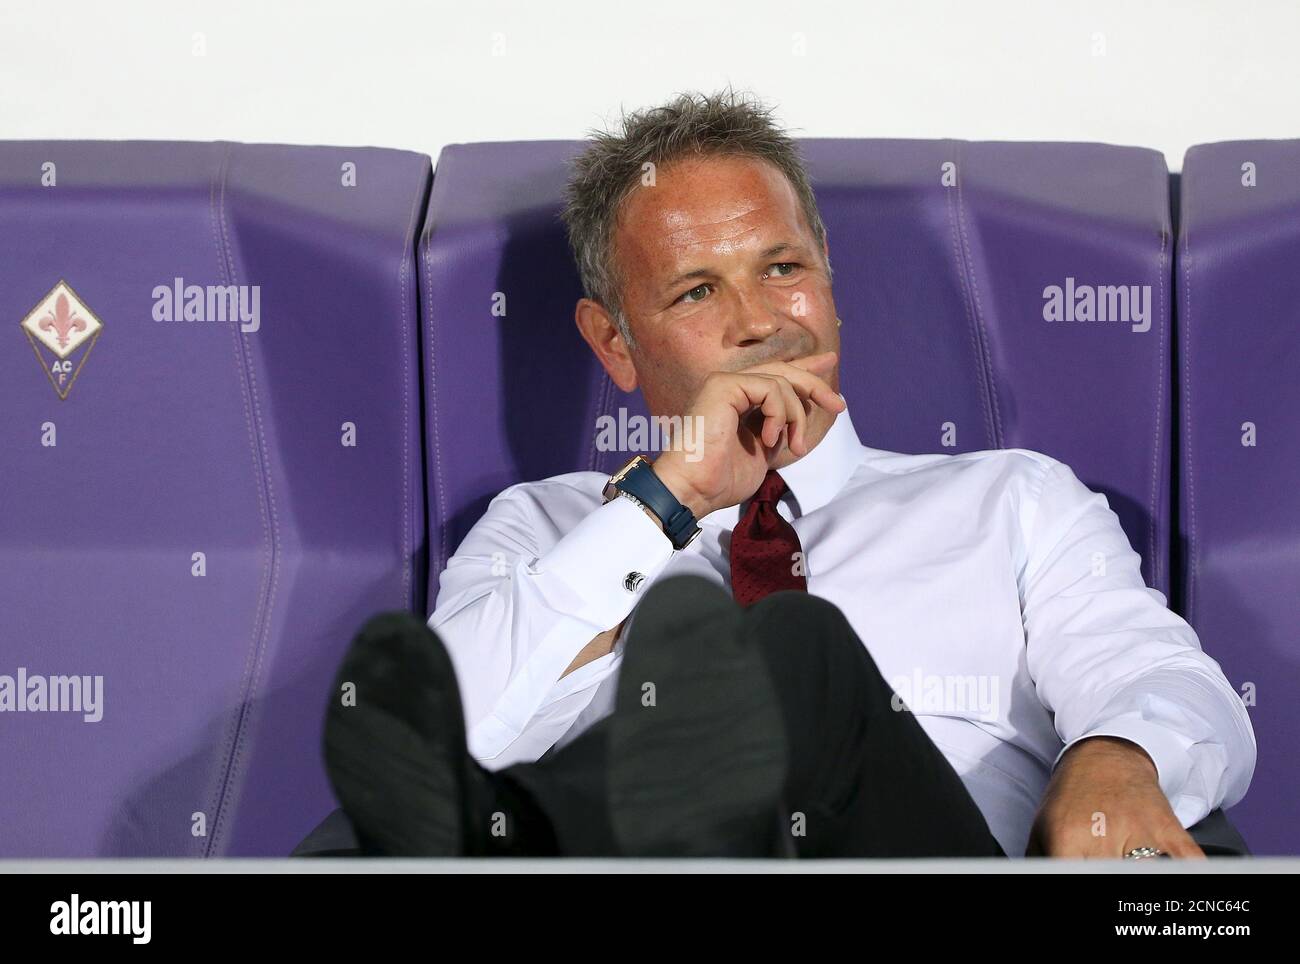 AC Milan coach Sinisa Mihajlovic sits before the start of their Italian Serie A soccer match against Fiorentina in Florence, Italy, August 23, 2015.   REUTERS/Alessandro Bianchi Stock Photo